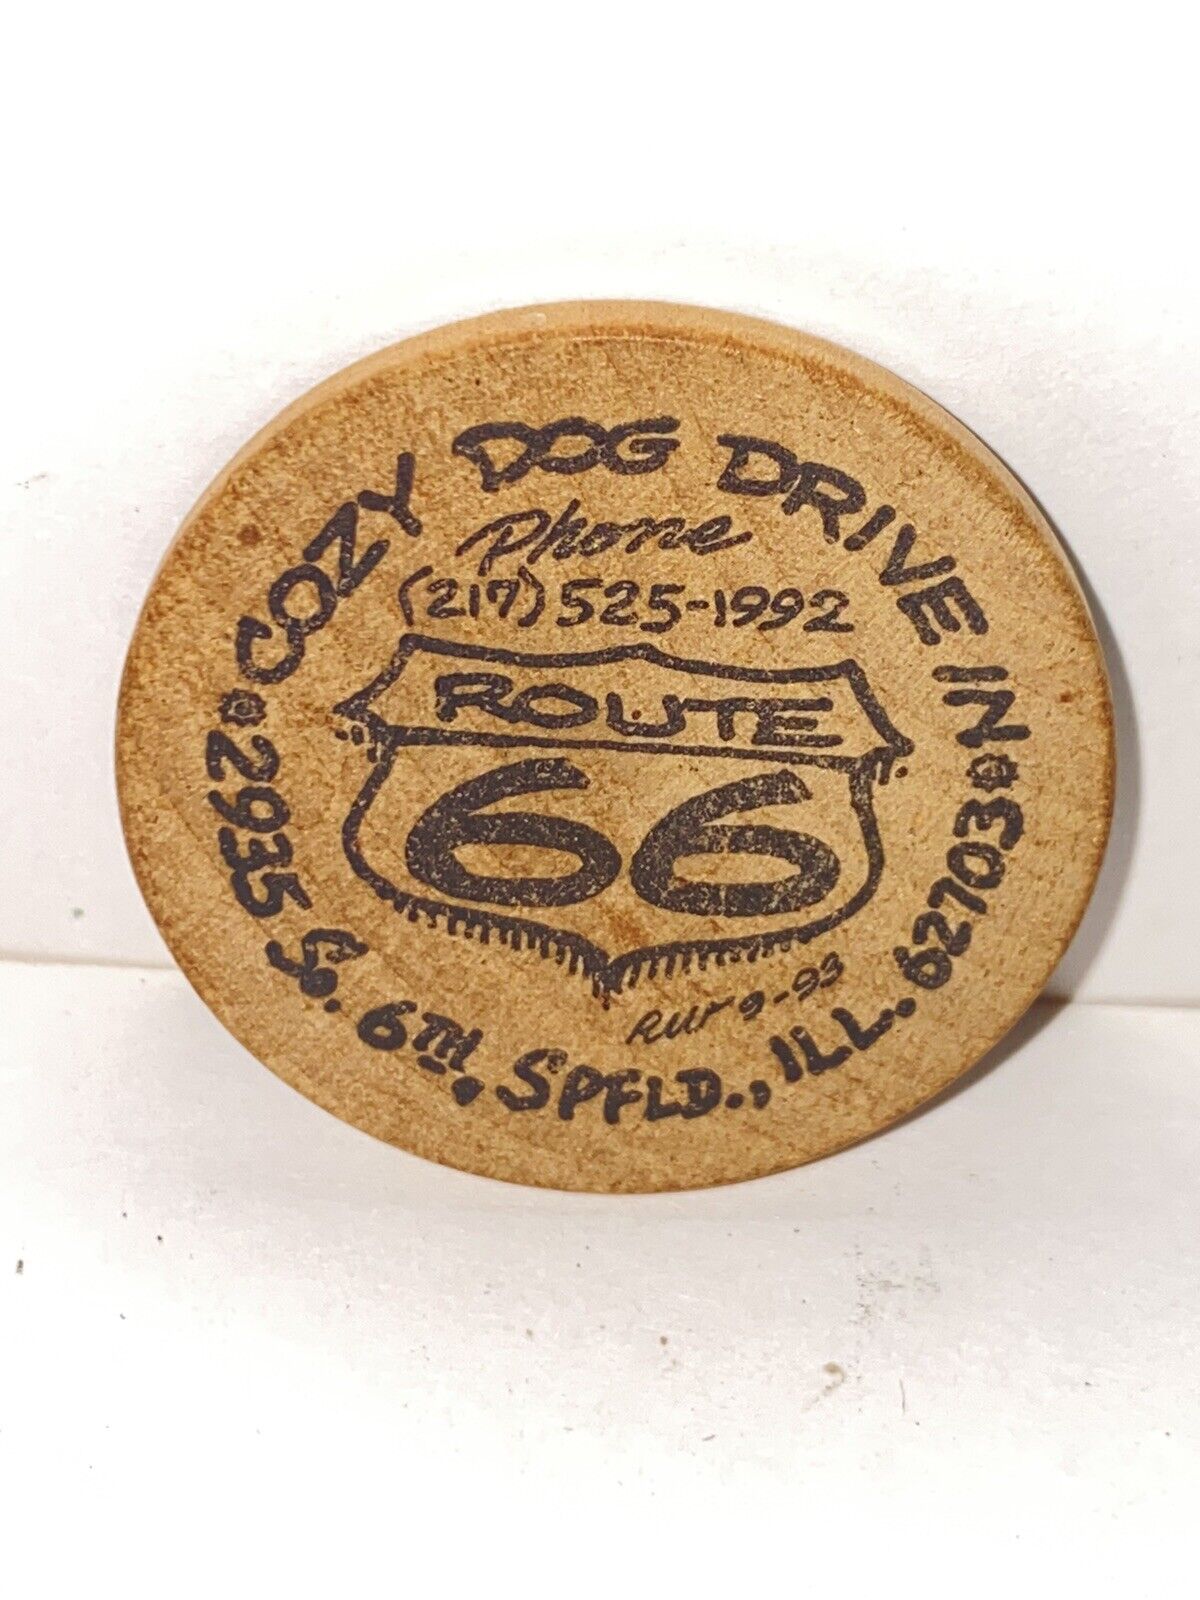 Rare Vintage Route 66 Cozy Dog Drive In Springfield IL Wood One Free Cozy Token